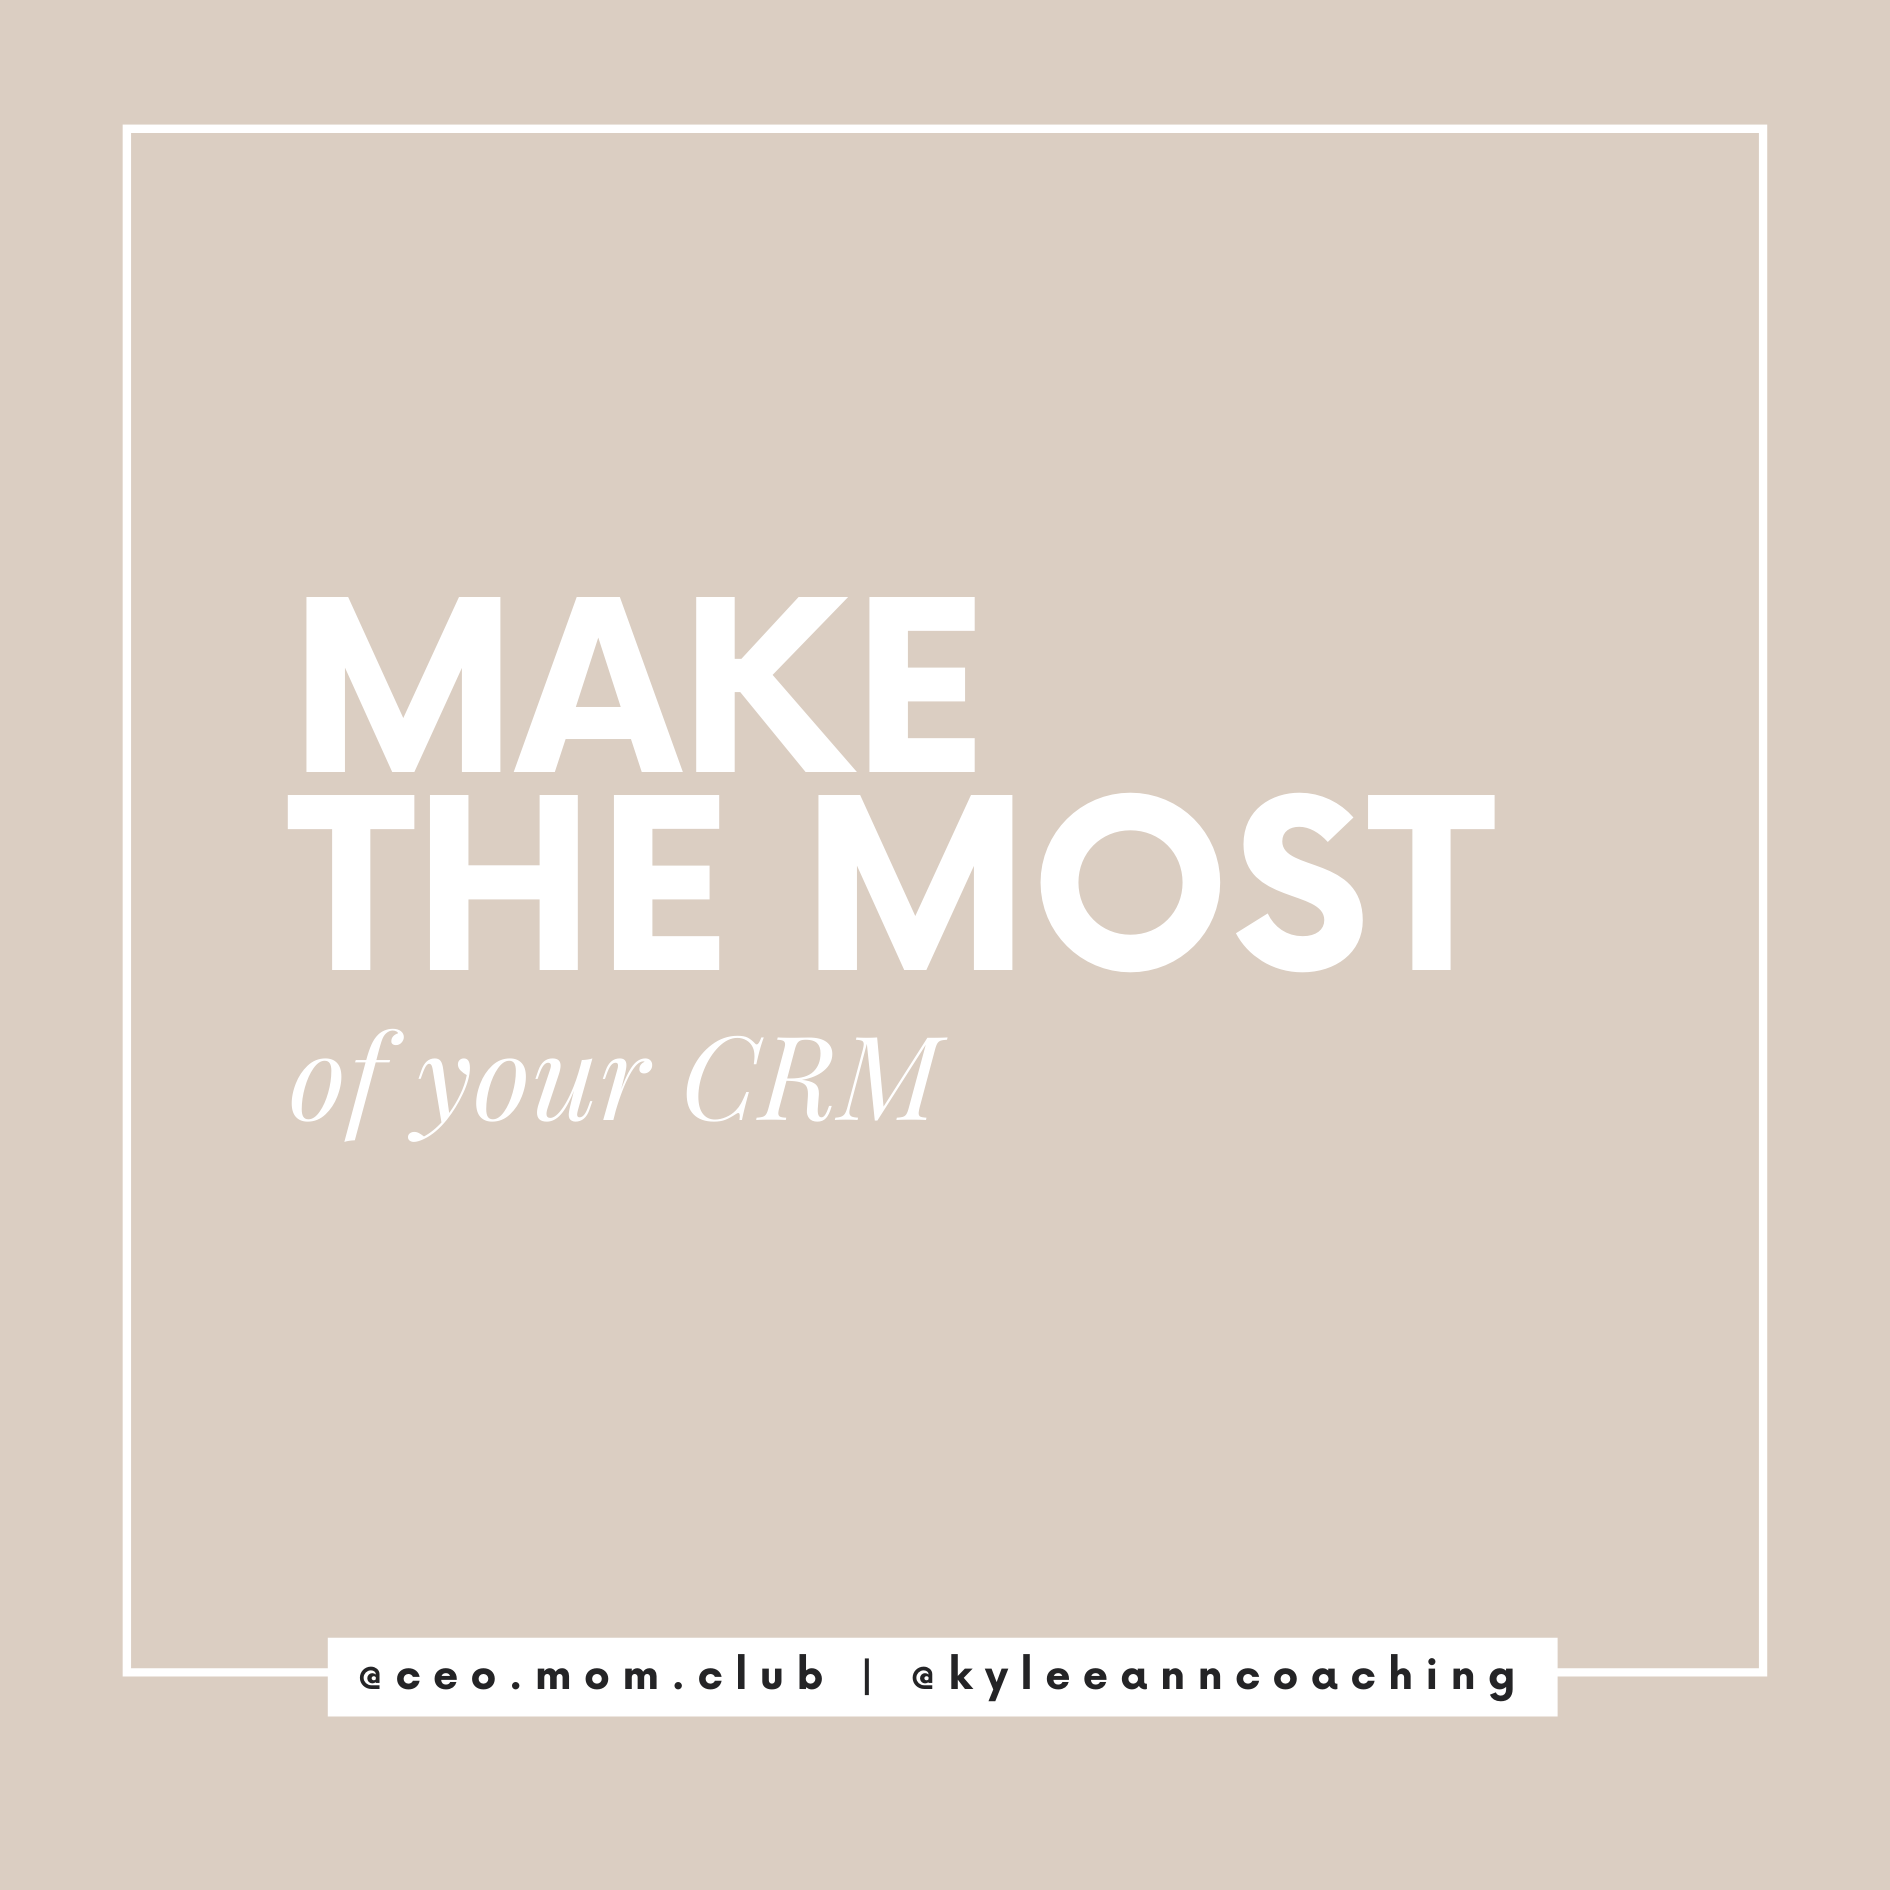 Make the most of your CRM